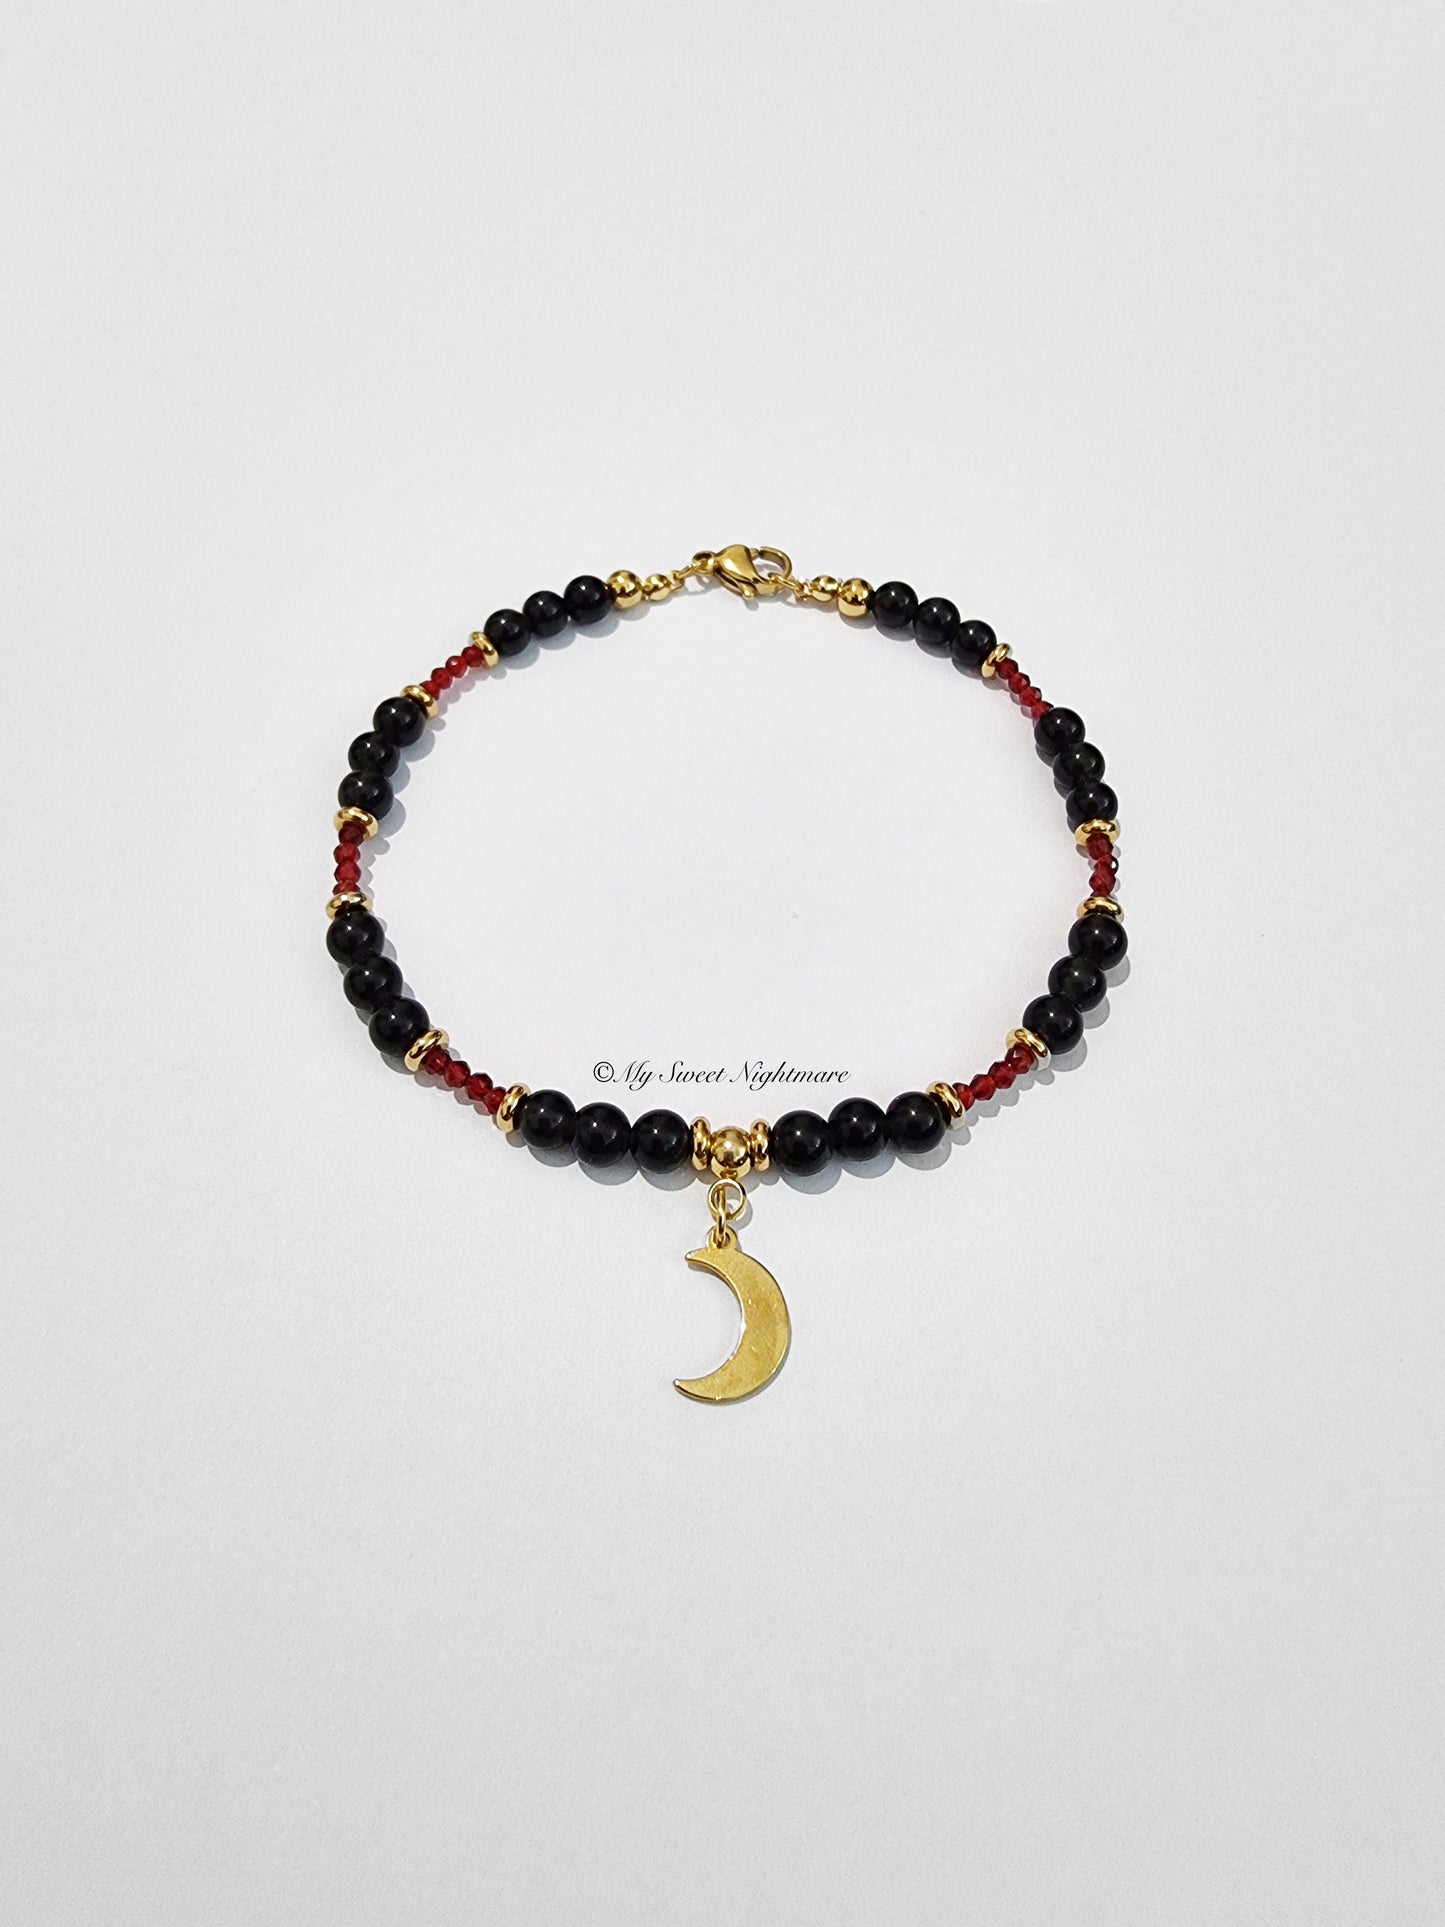 Bracelet with Golden Obsidian, crescent moon and red crystals